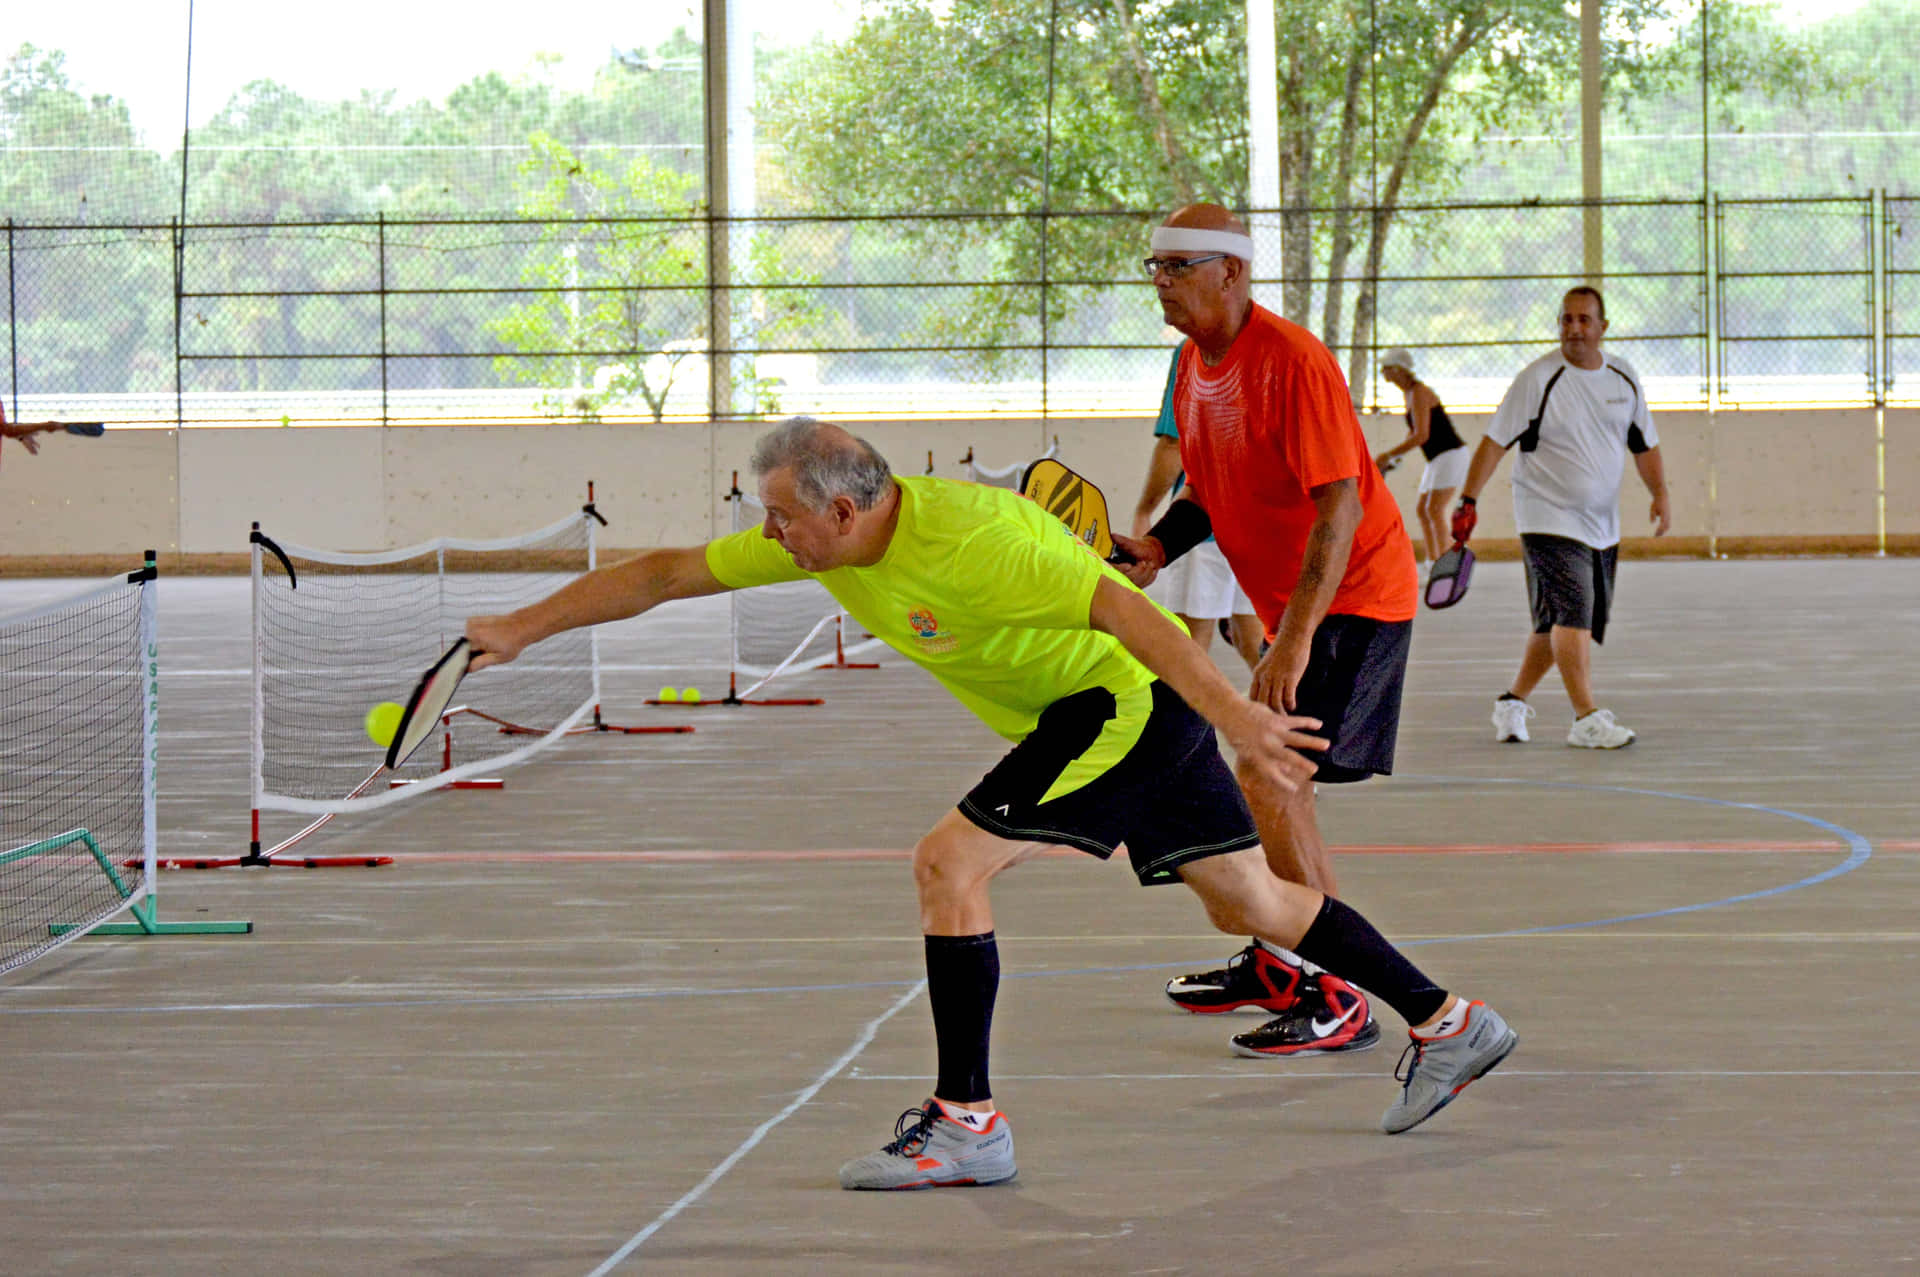 "Pickleball - The Perfect Combination of Strategy and Fun!"